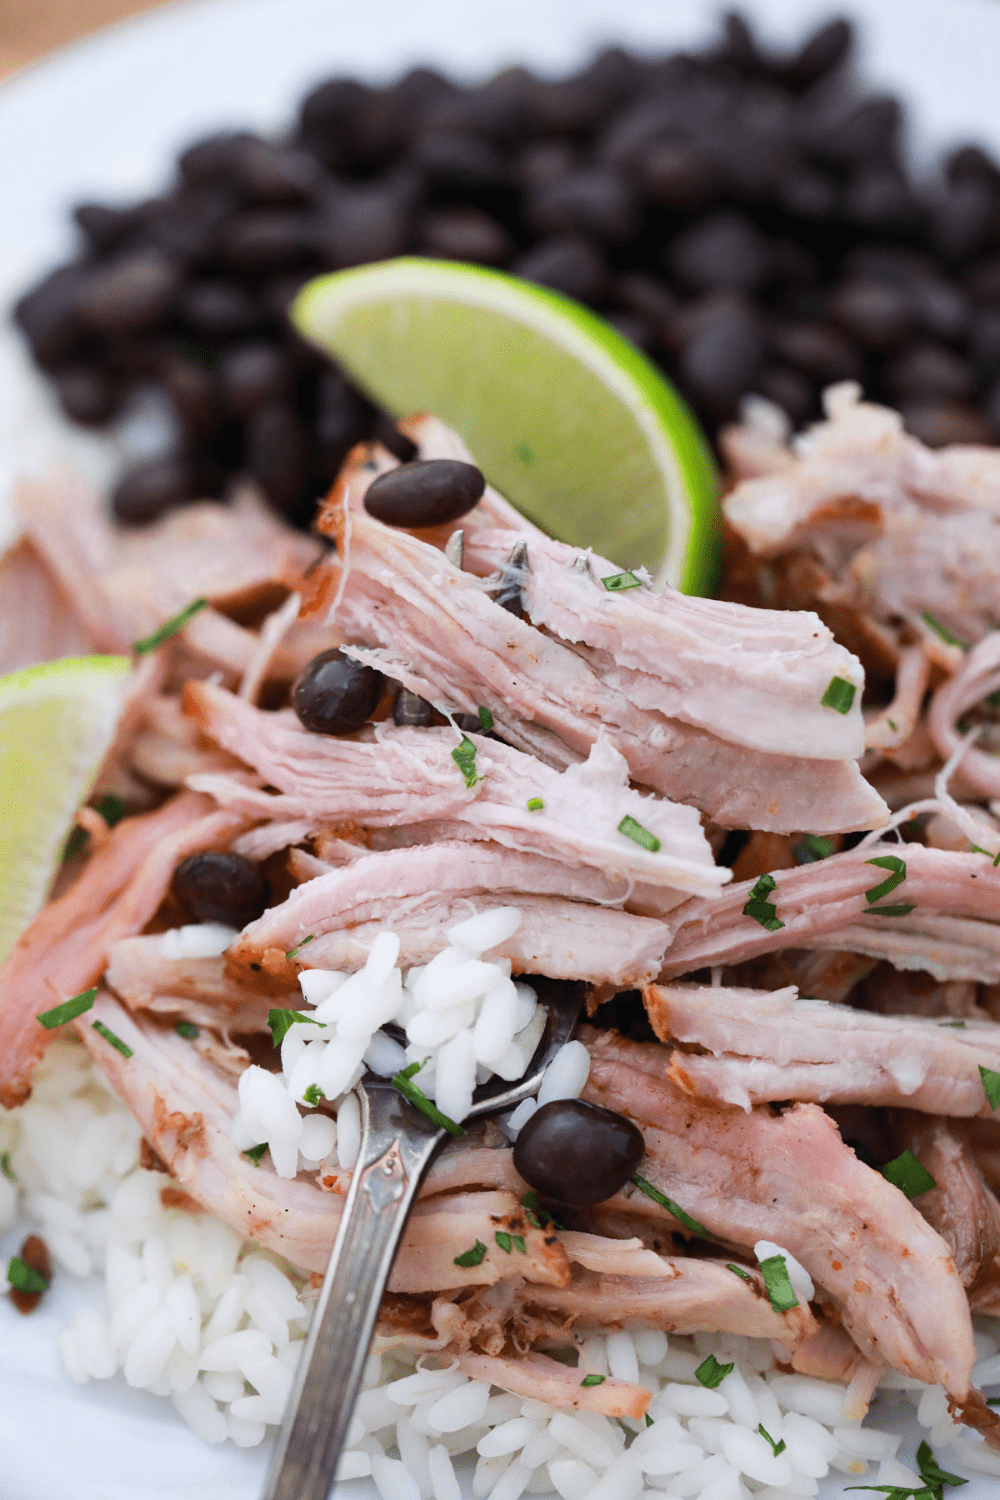 This Puerto Rican Pernil is seasoned with adobo sauce, lime juice, sazon, and much more. Enjoying Pernil is an experience that many cherish. via @mystayathome